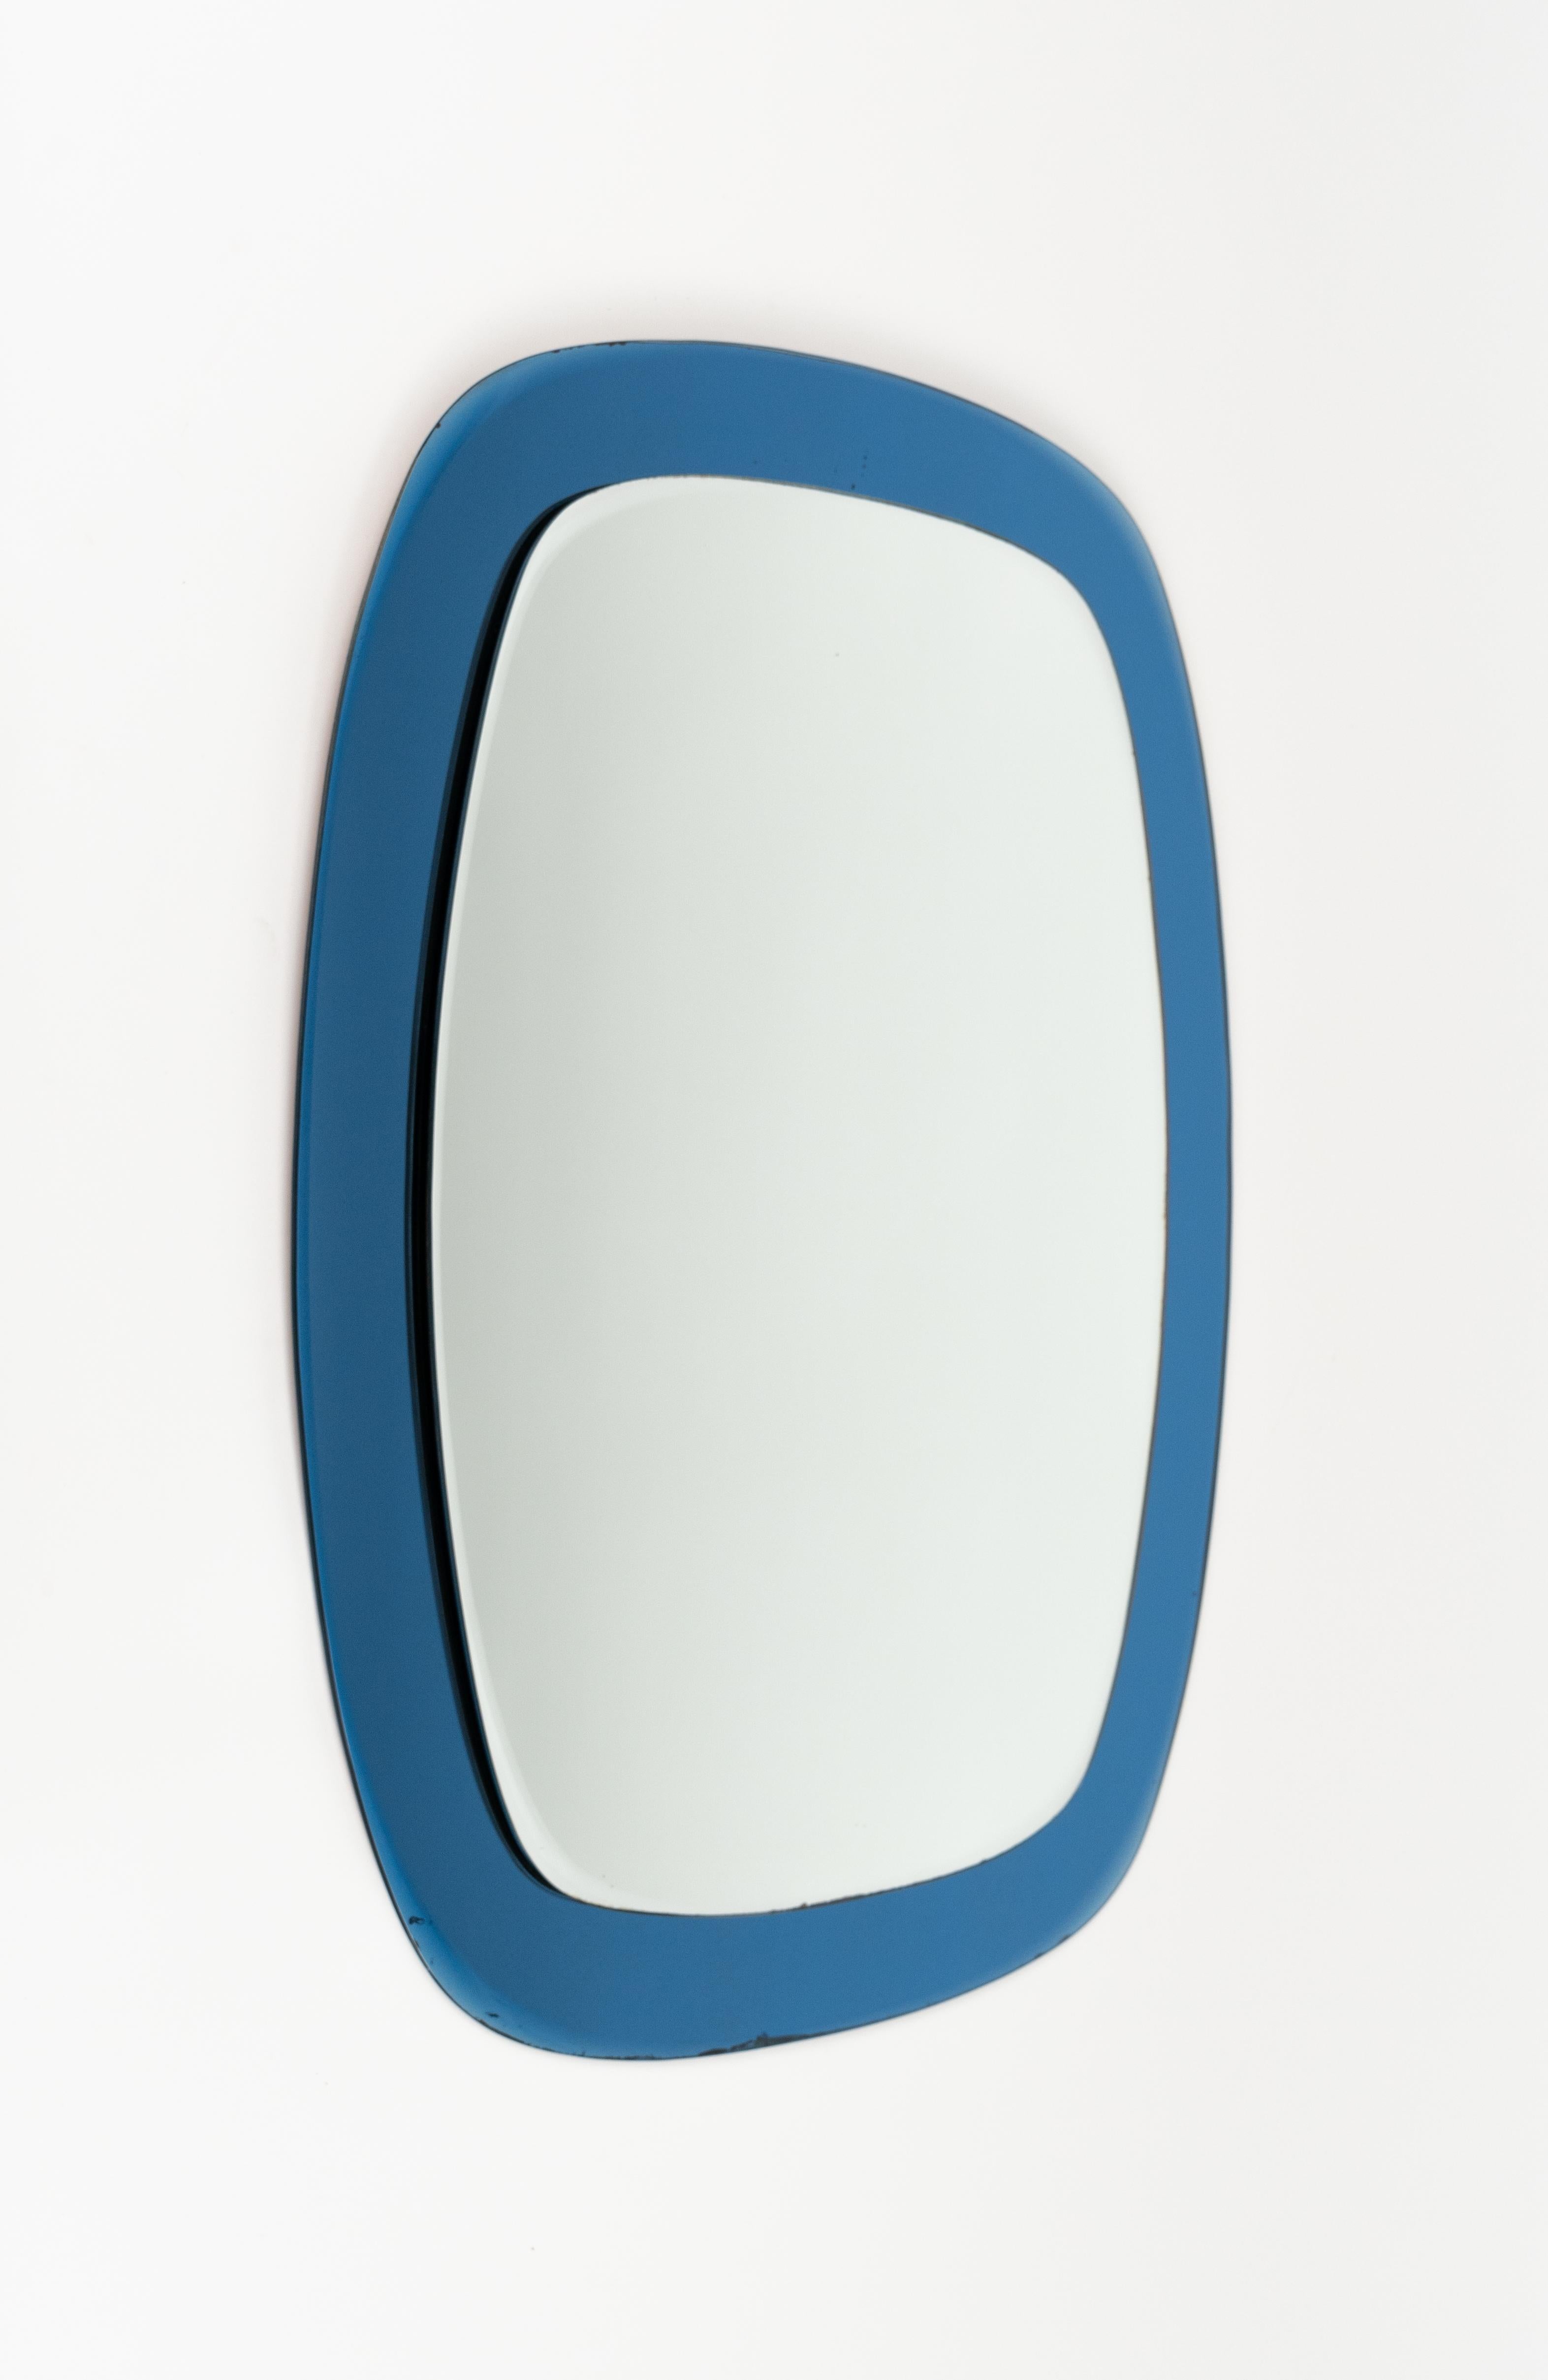 Midcentury beautiful double-level oval wall mirror with a smoked blue glass frame attributed to Cristal Art.  

Made in Italy in the 1960s.

The mirror, original of the period, shows small signs of discolouration.